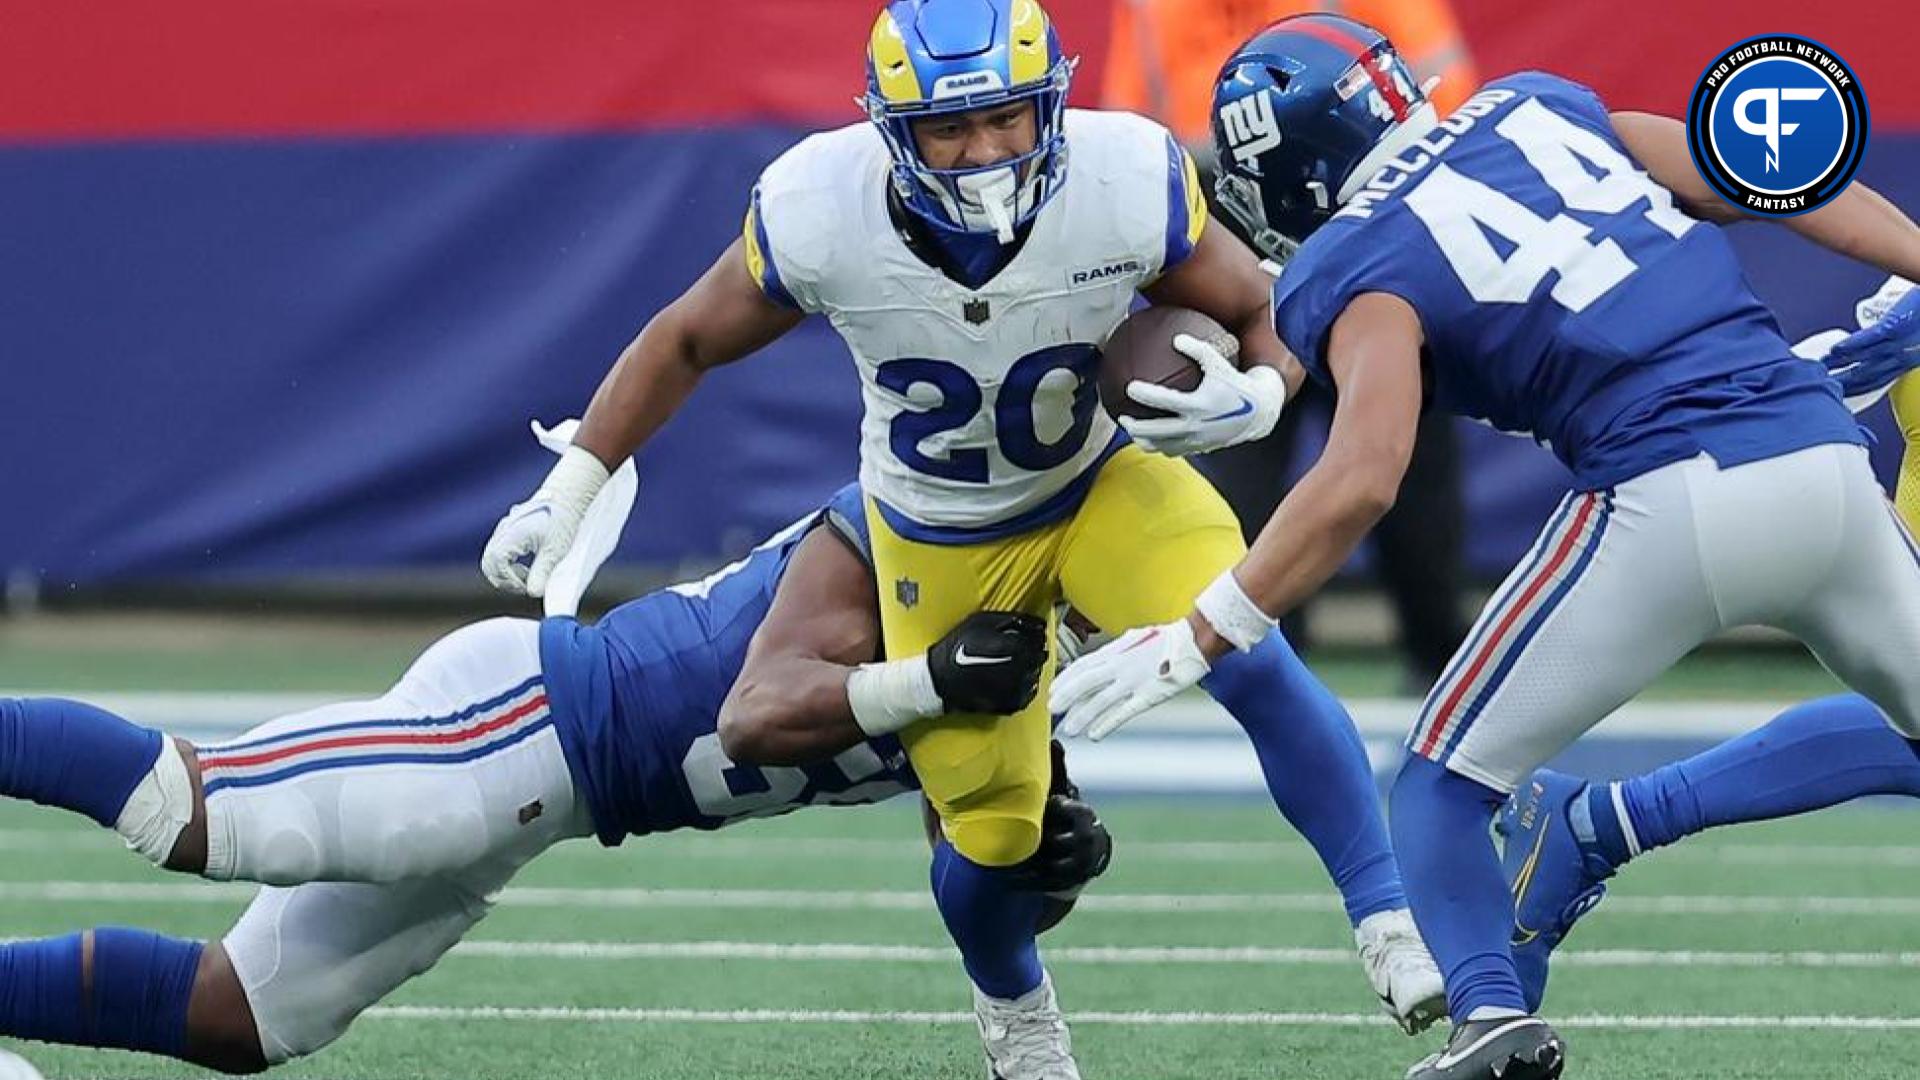 Los Angeles Rams running back Ronnie Rivers (20) runs with the ball against New York Giants linebacker Bobby Okereke (58) and cornerback Nick McCloud (44) during the third quarter at MetLife Stadium.